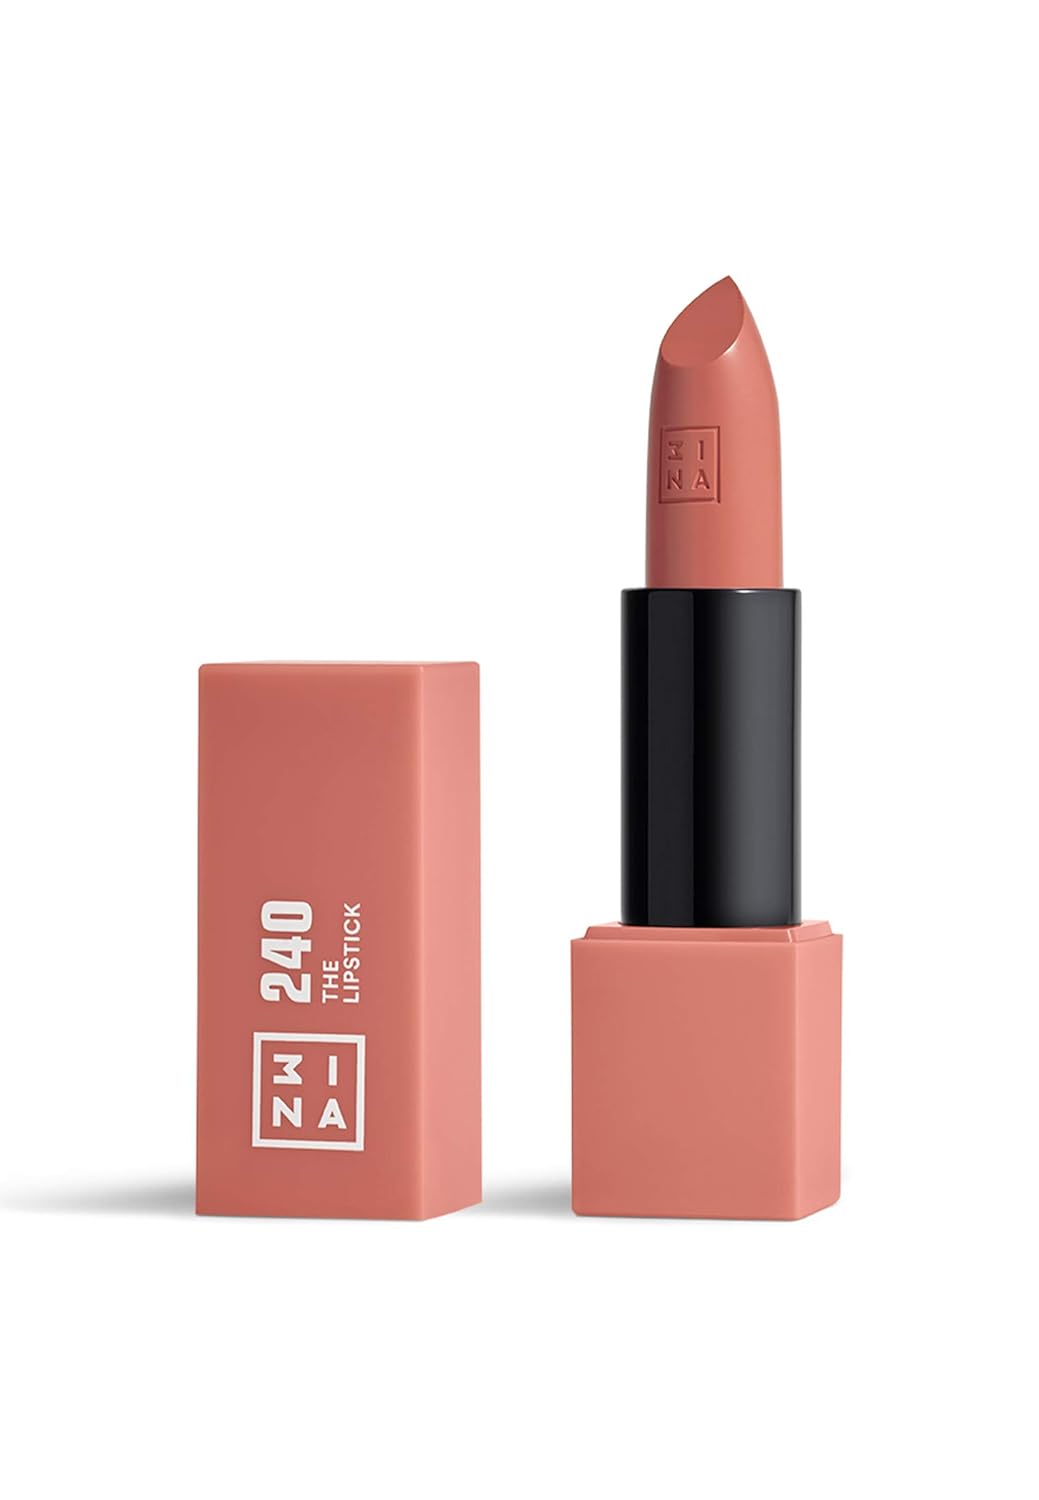 3ina make -up - The Lipstick 240 - Medium Skin Color Pink Lipstick - Matte Lip Pen with Vitamin E And Shea Butter - Long -Lasting Highly Pigmented Cream - Vanilla Fragrance - Vegan - Cruelty Free